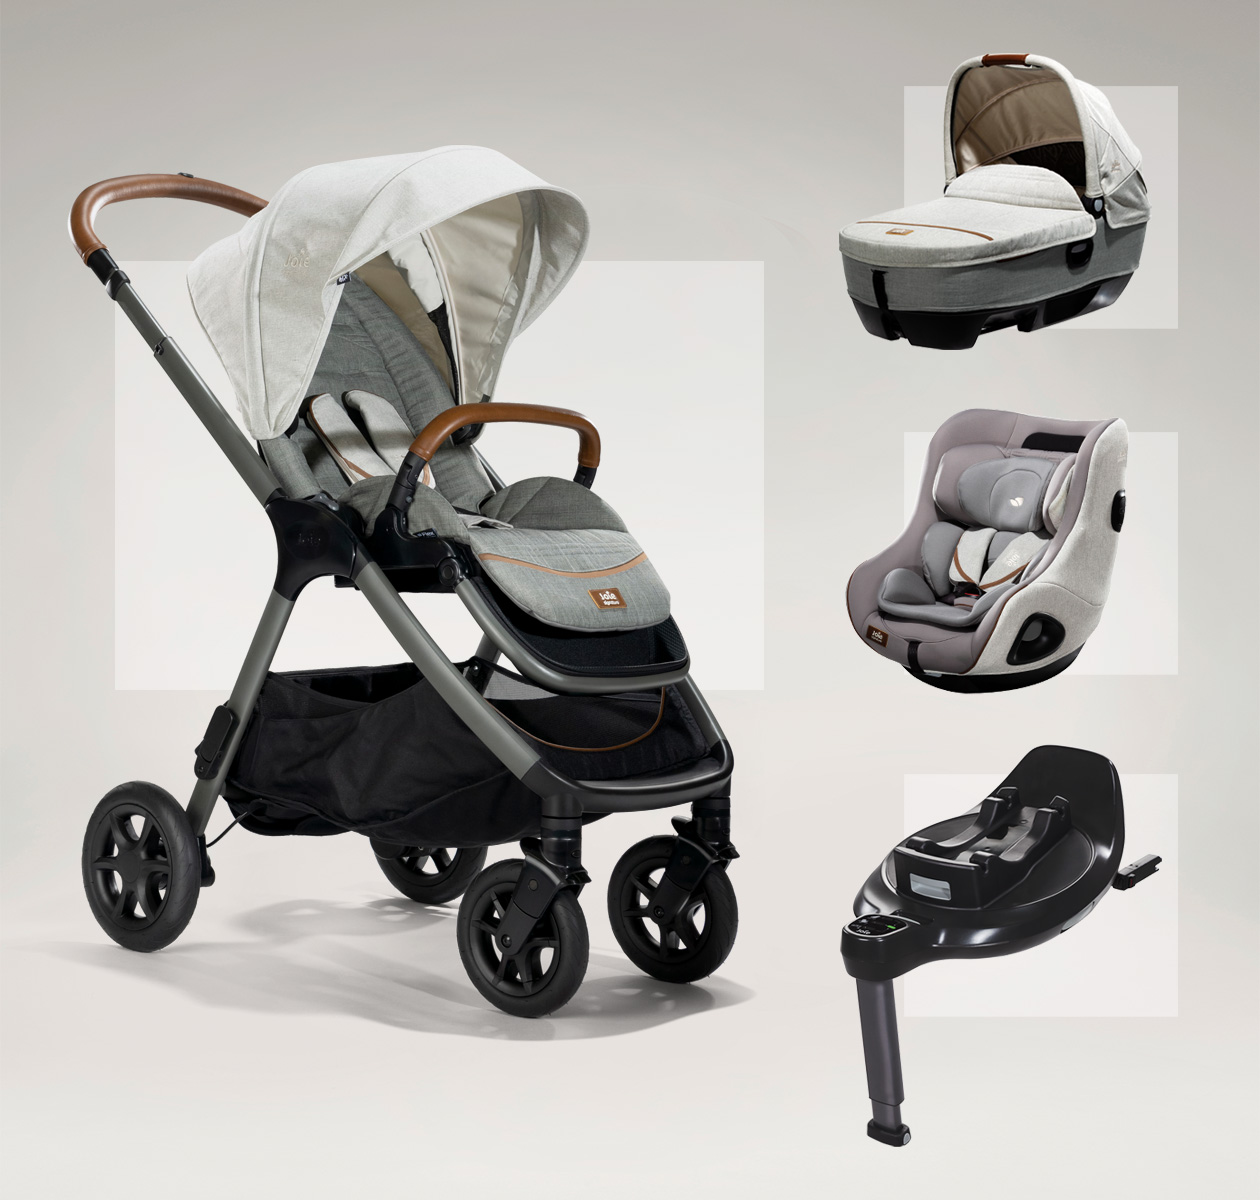 A collage showing 4 gray products in Joie’s grow ready bundle: the Finiti pram, Calmi R129 carry cot, I-Harbour toddler seat, and I-Base Encore.